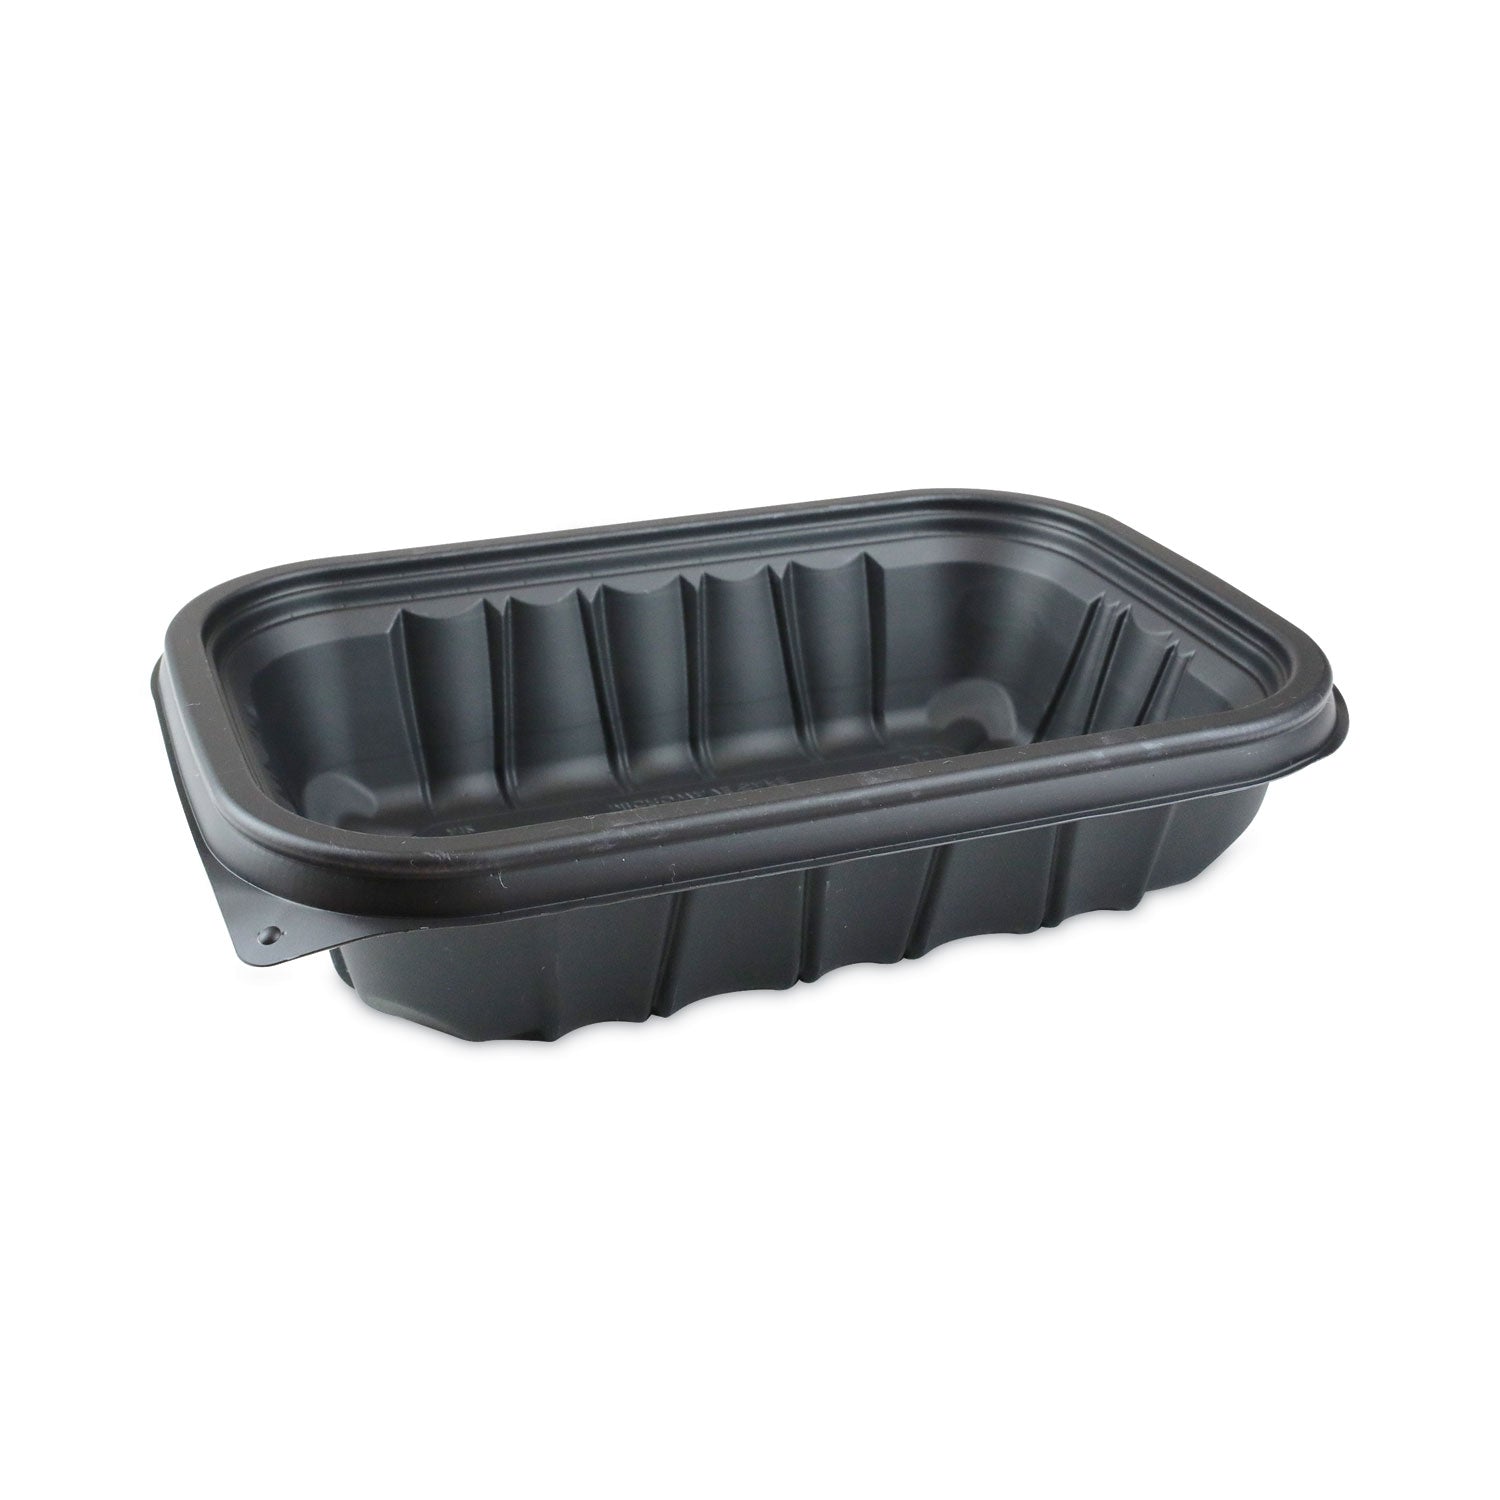 earthchoice-entree2go-takeout-container-32-oz-866-x-575-x-272-black-plastic-300-carton_pctycnb9x632000 - 1